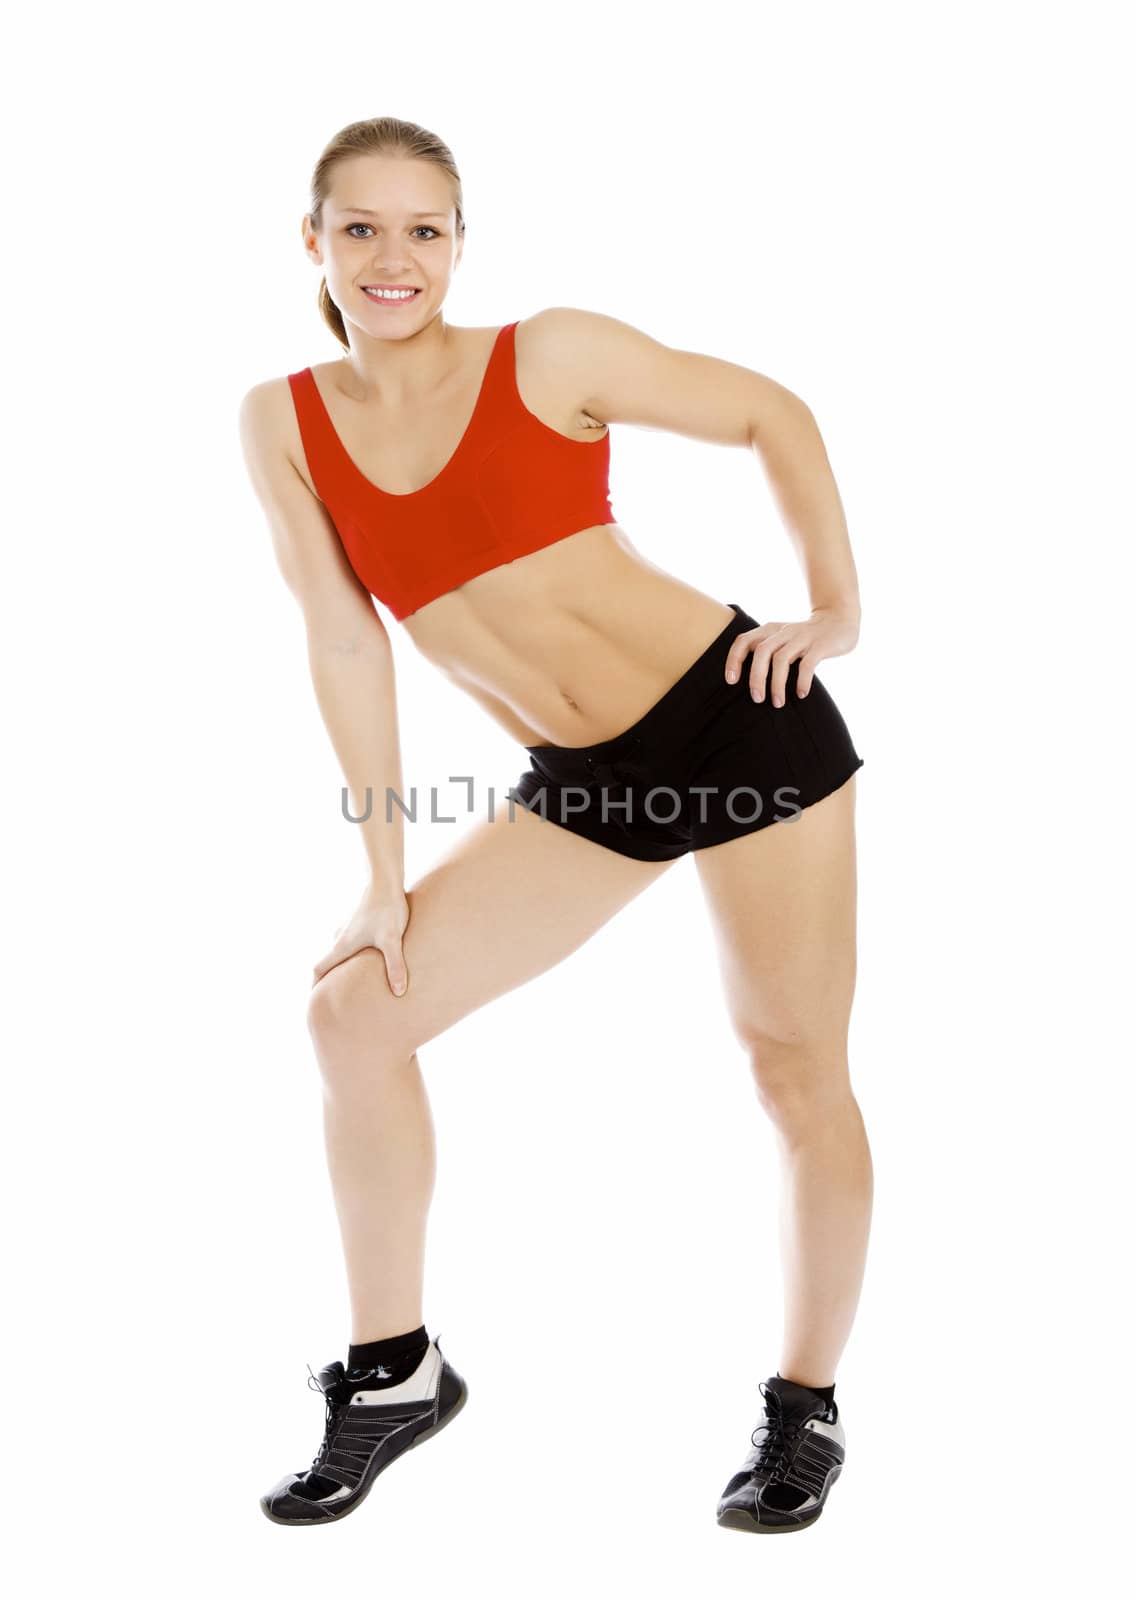 Smiling young sporty muscular woman. Isolated over white background